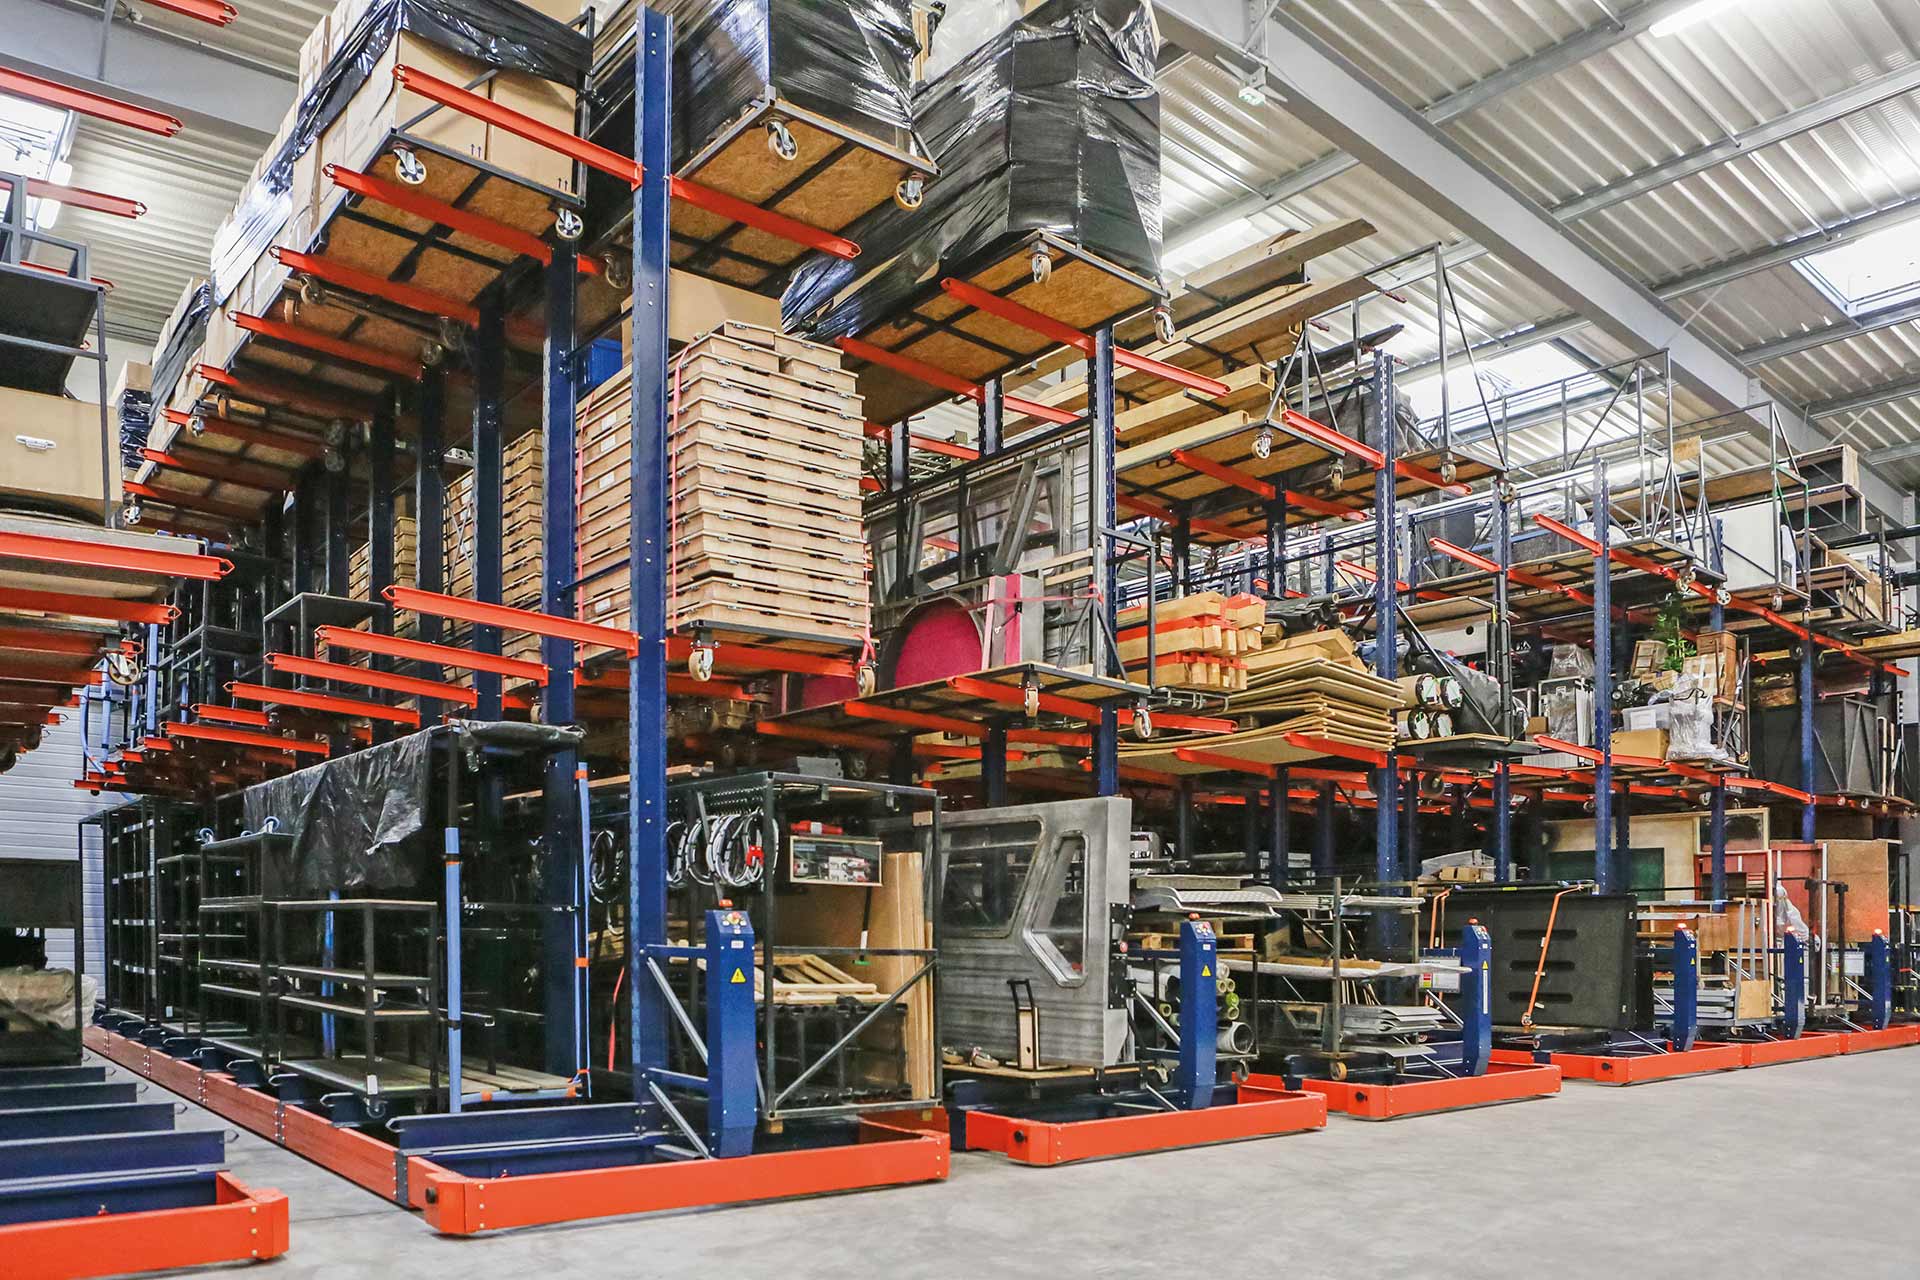 The Movirack system can be designed using cantilever racking to store multiple non-palletised loads